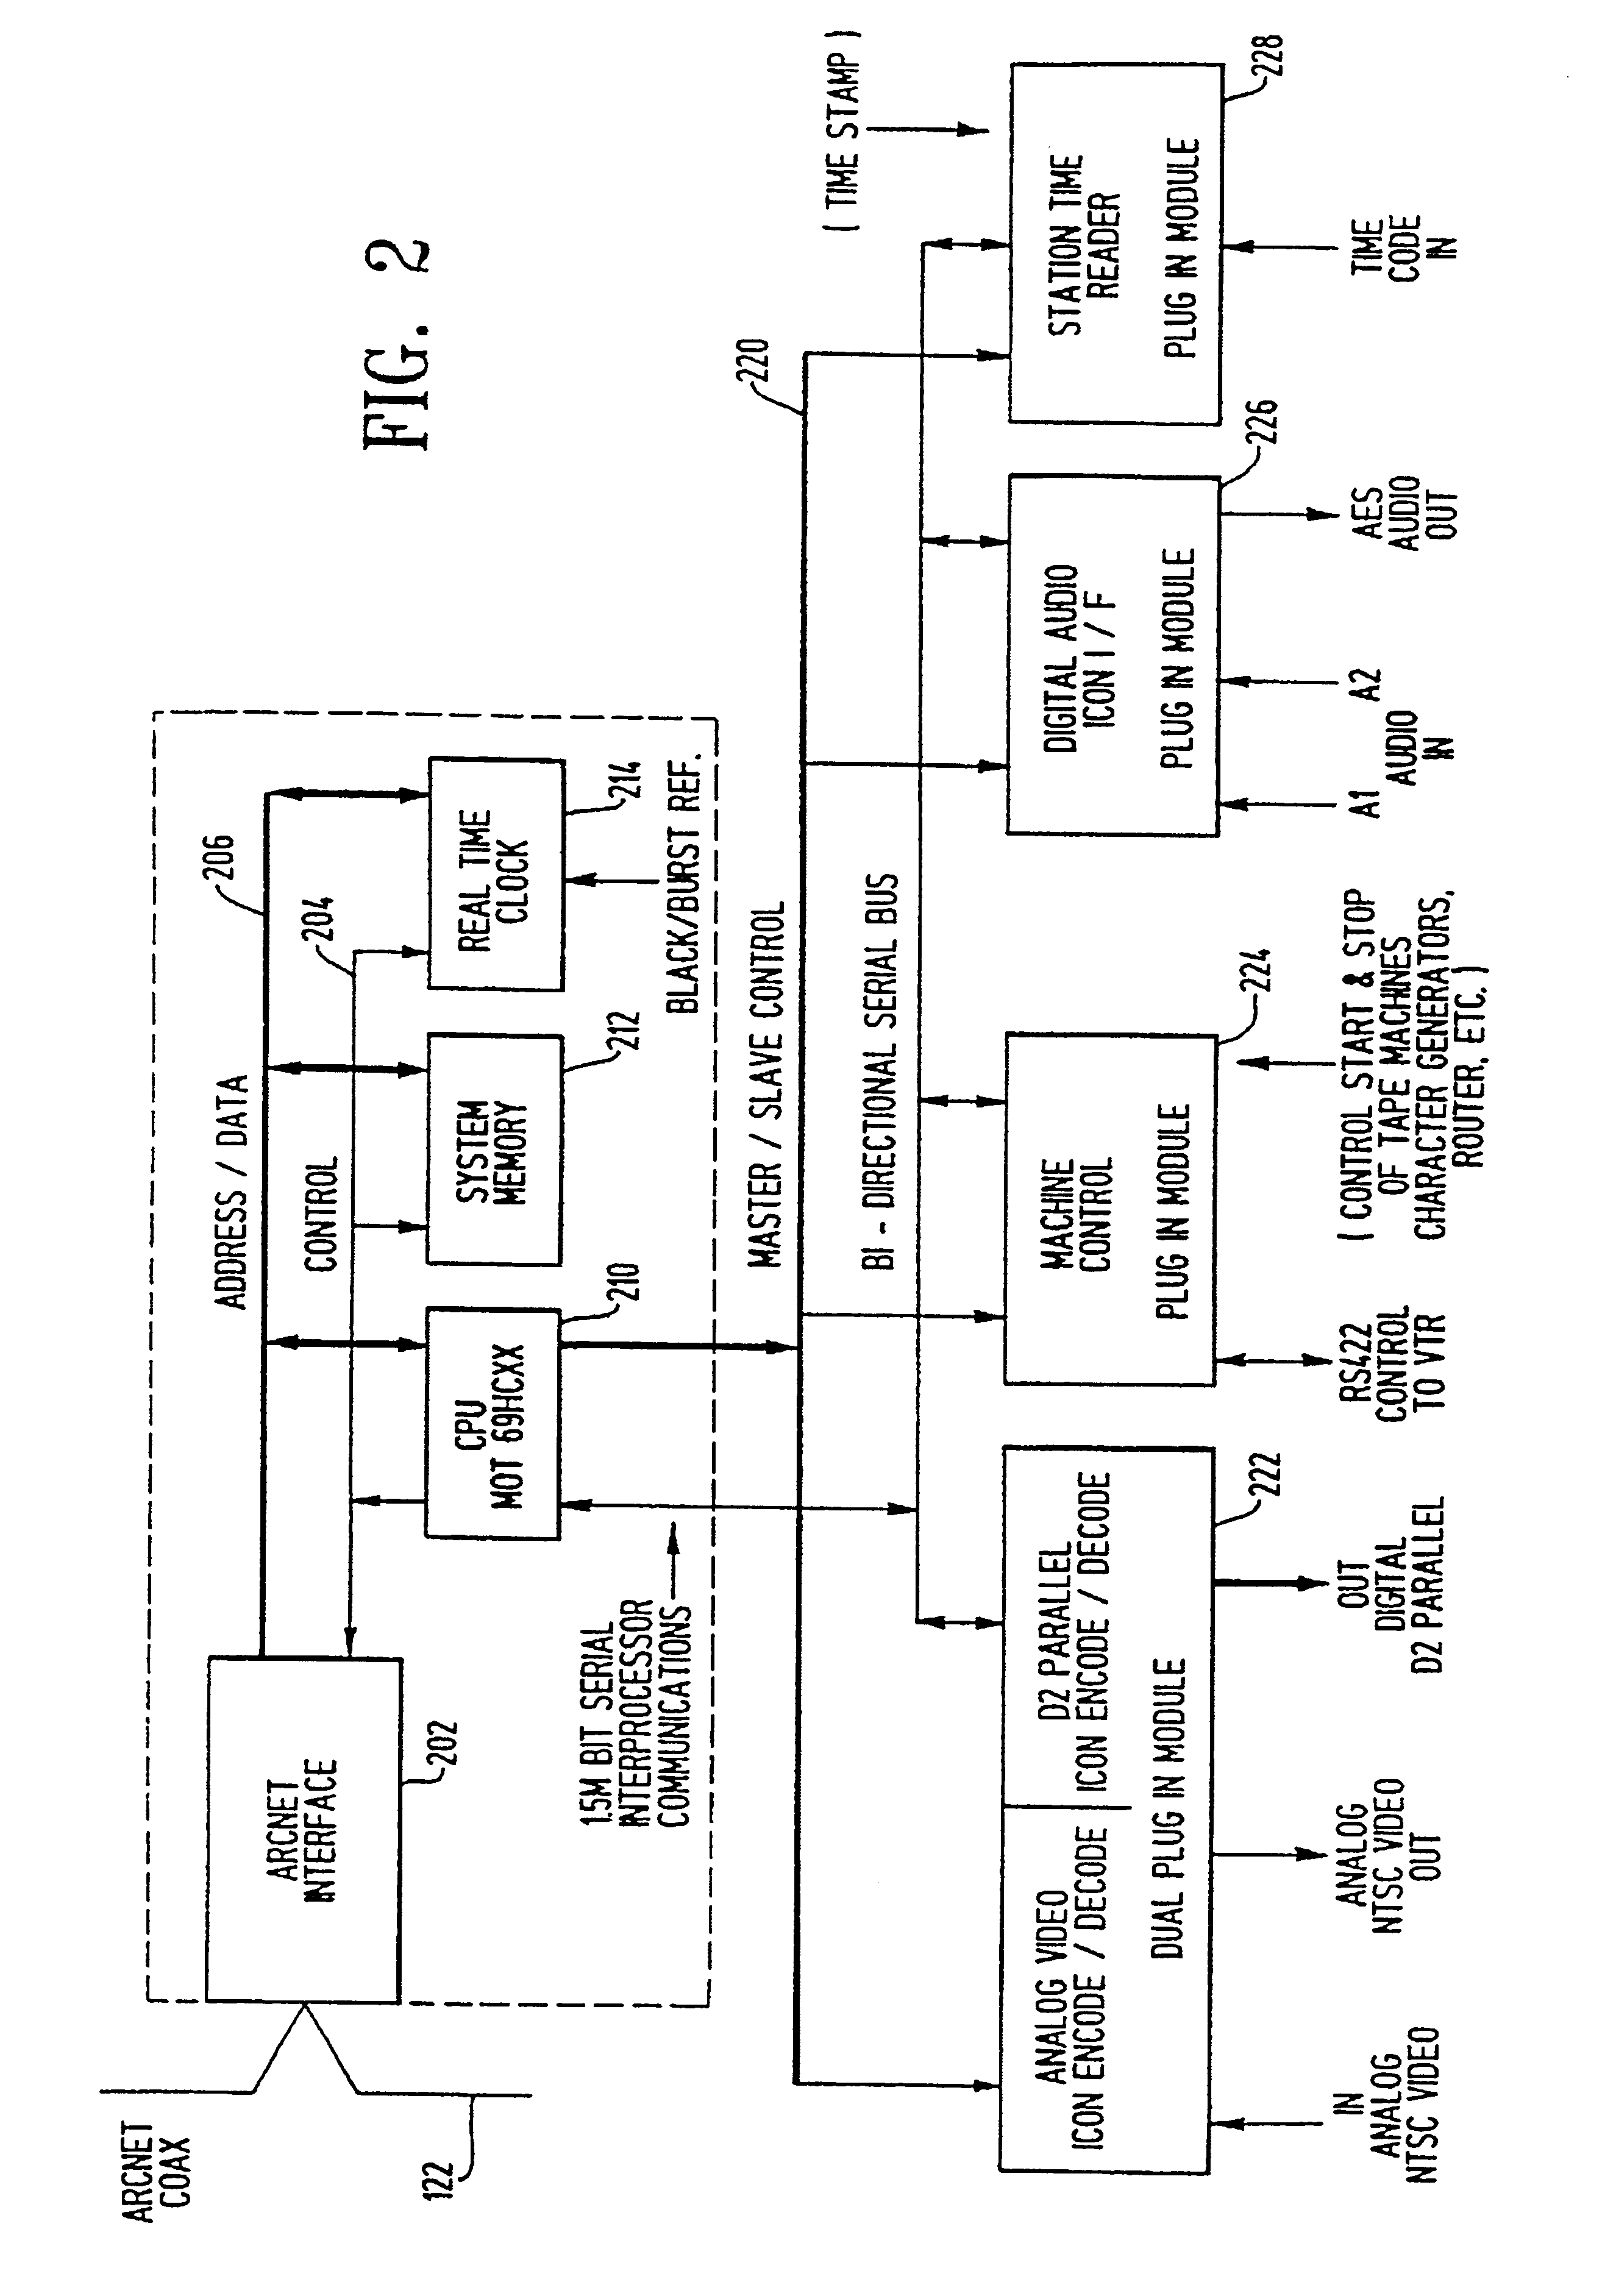 Apparatus for tracking the flow of video signals by incorportating patterns of machine readable signals which will appear at predetermined locations of a television picture